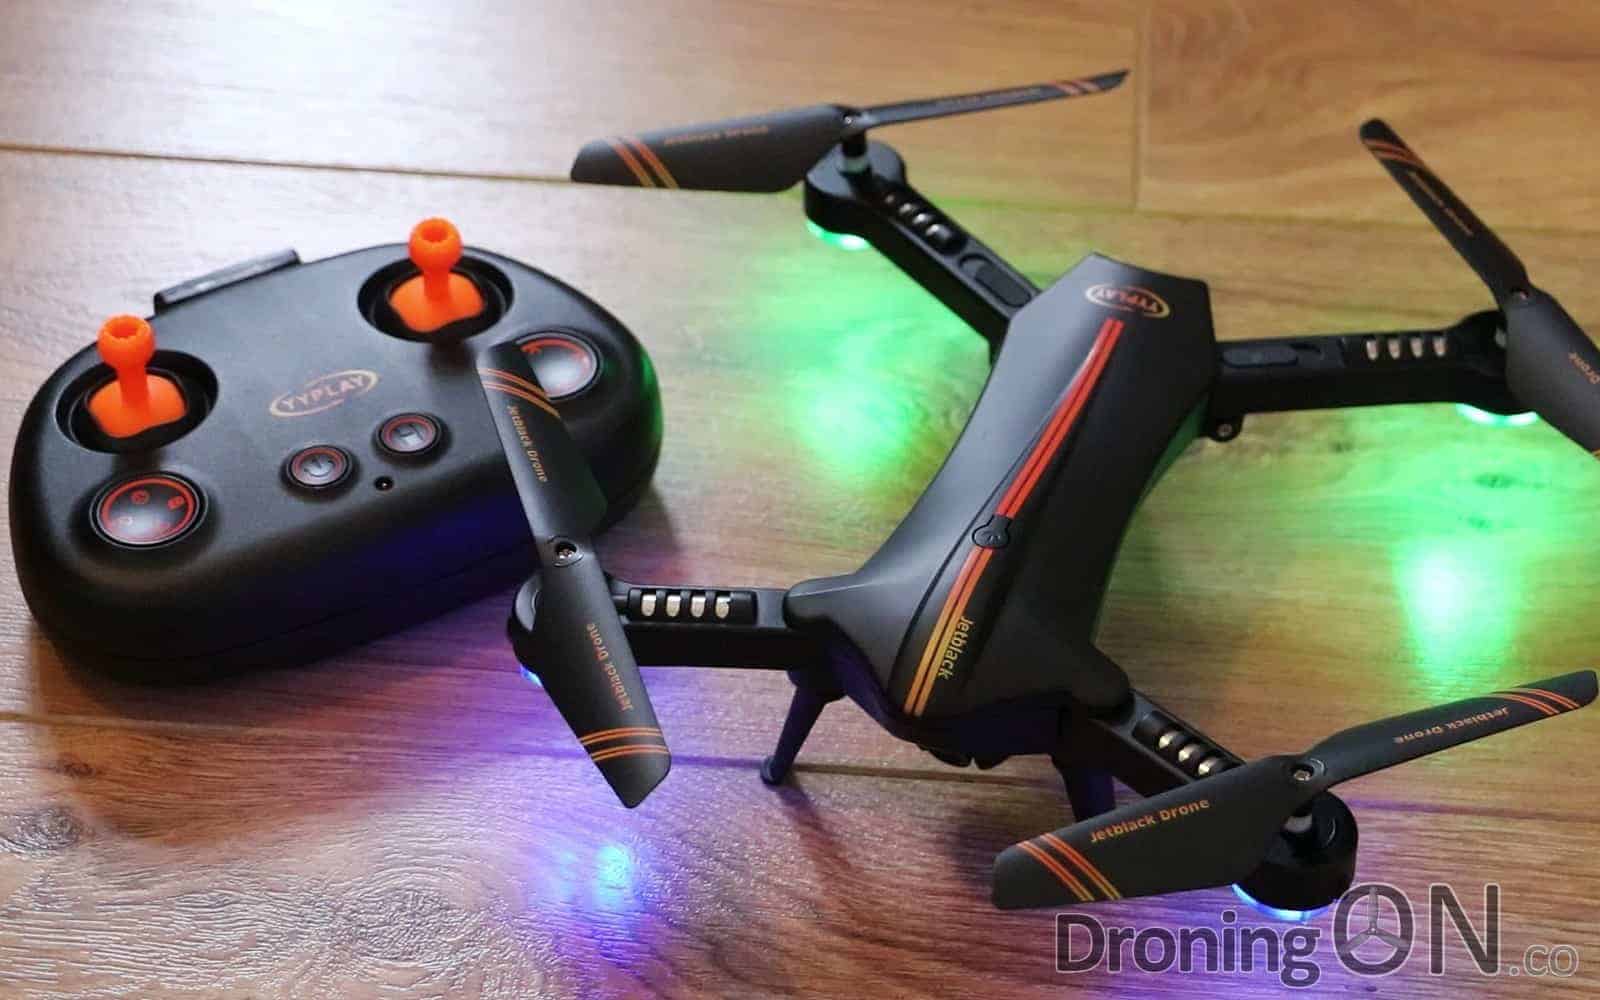 Jet Black Drone review, unboxing, inspection, setup and flight tests.